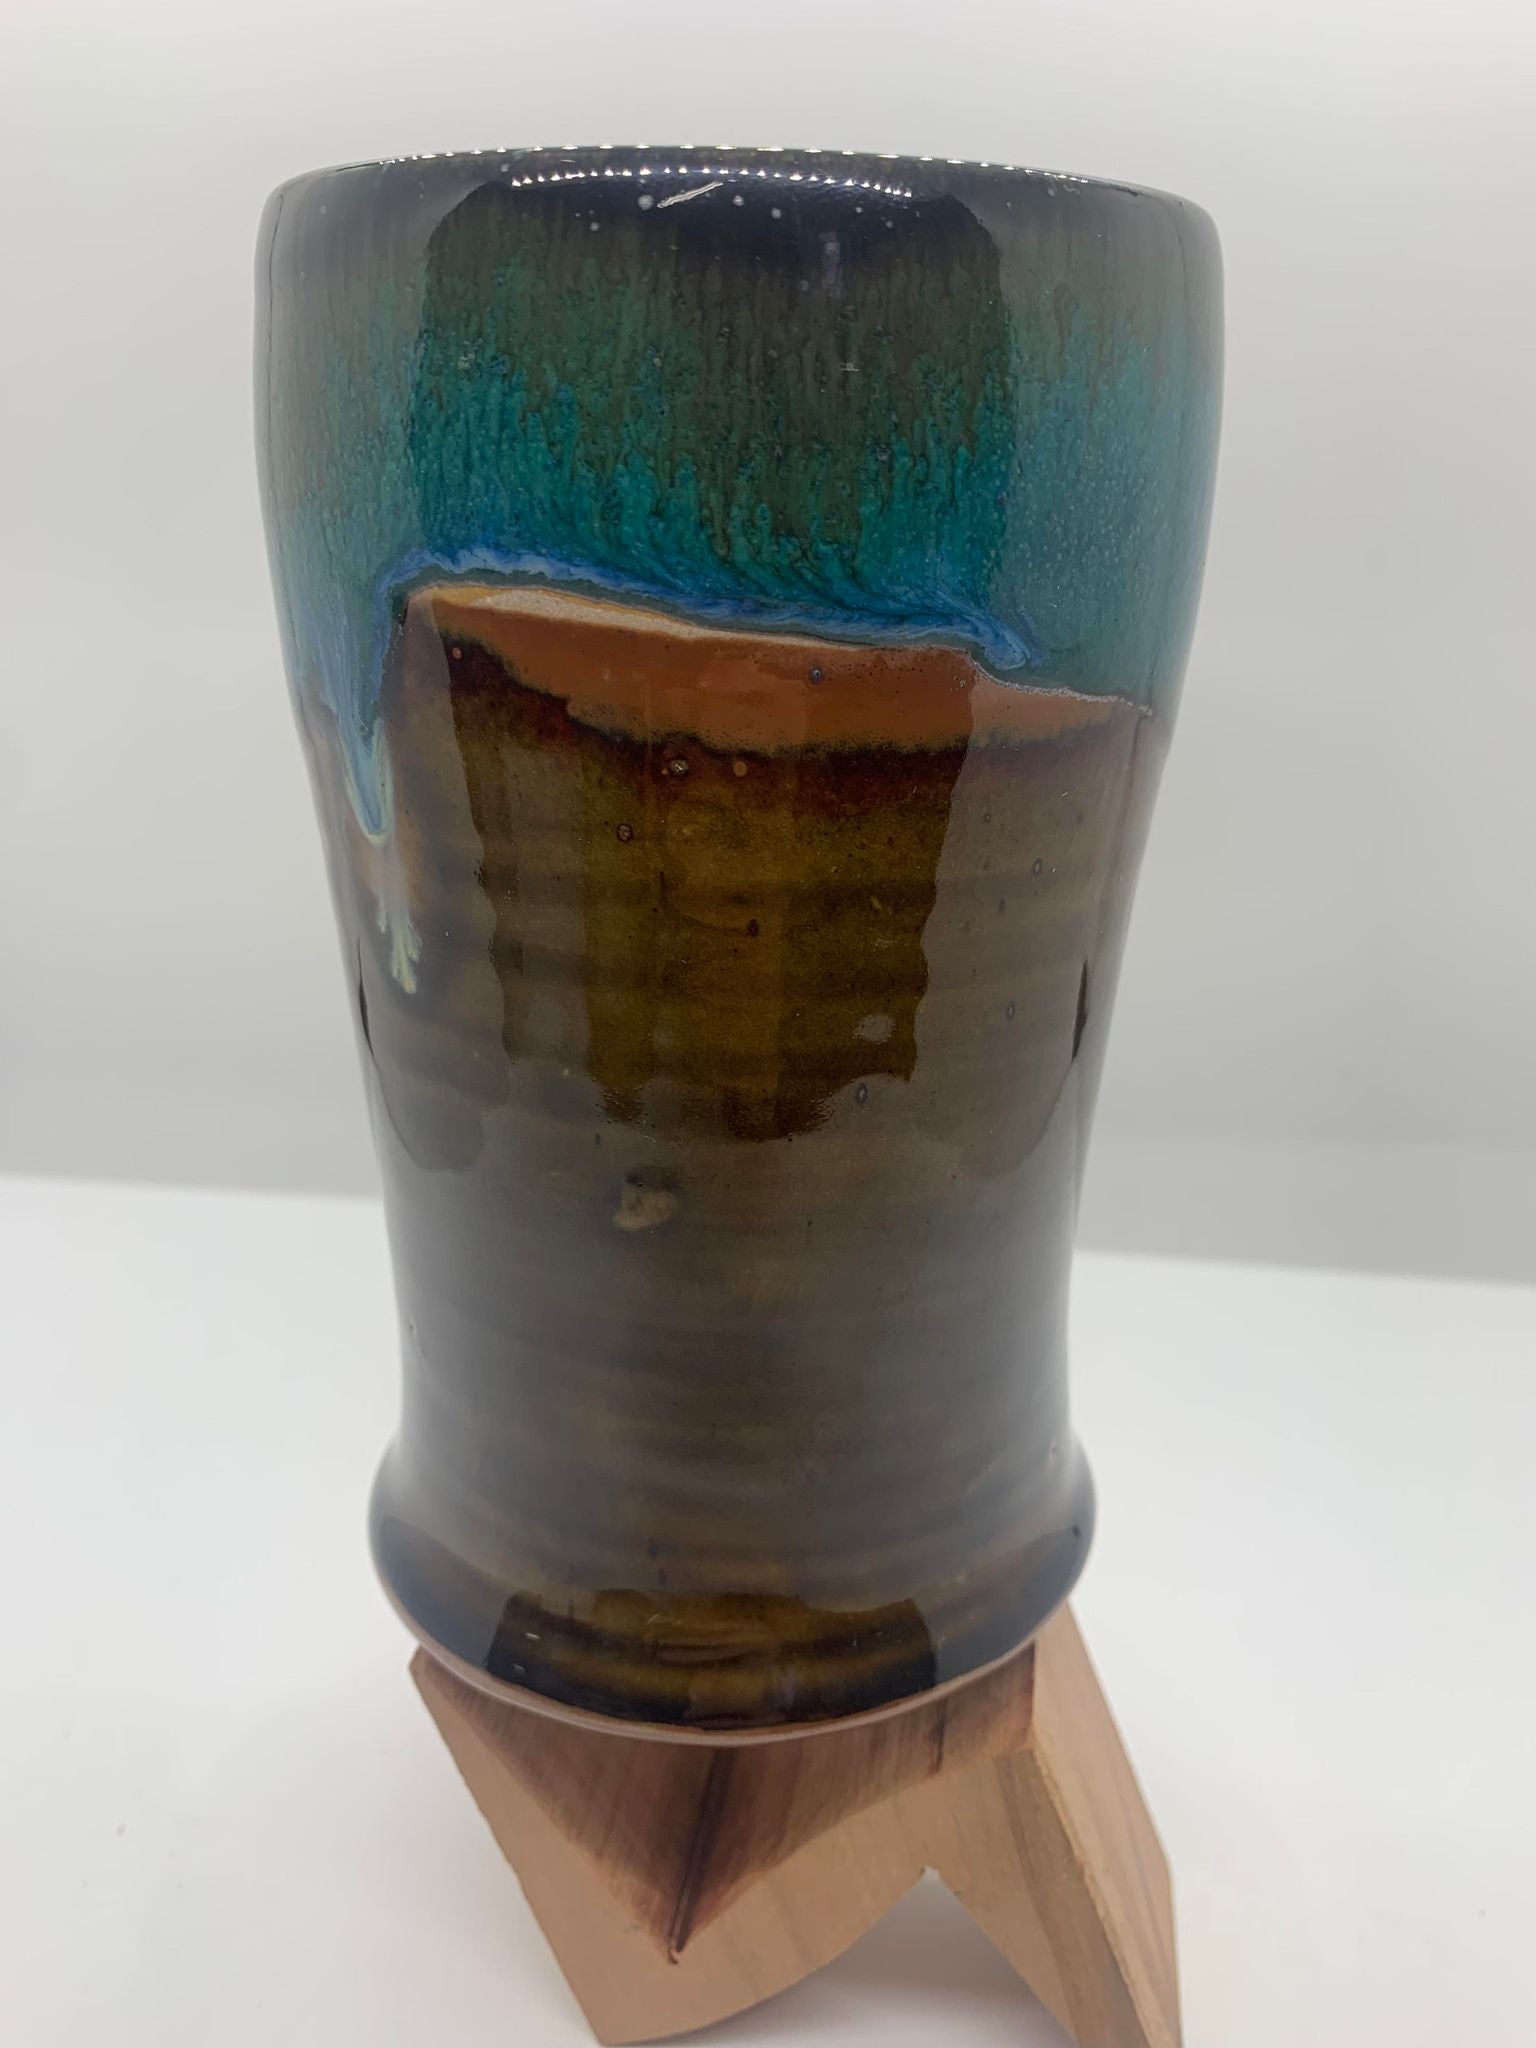 A Perry Munn Pottery Tumbler set on a wooden stand.